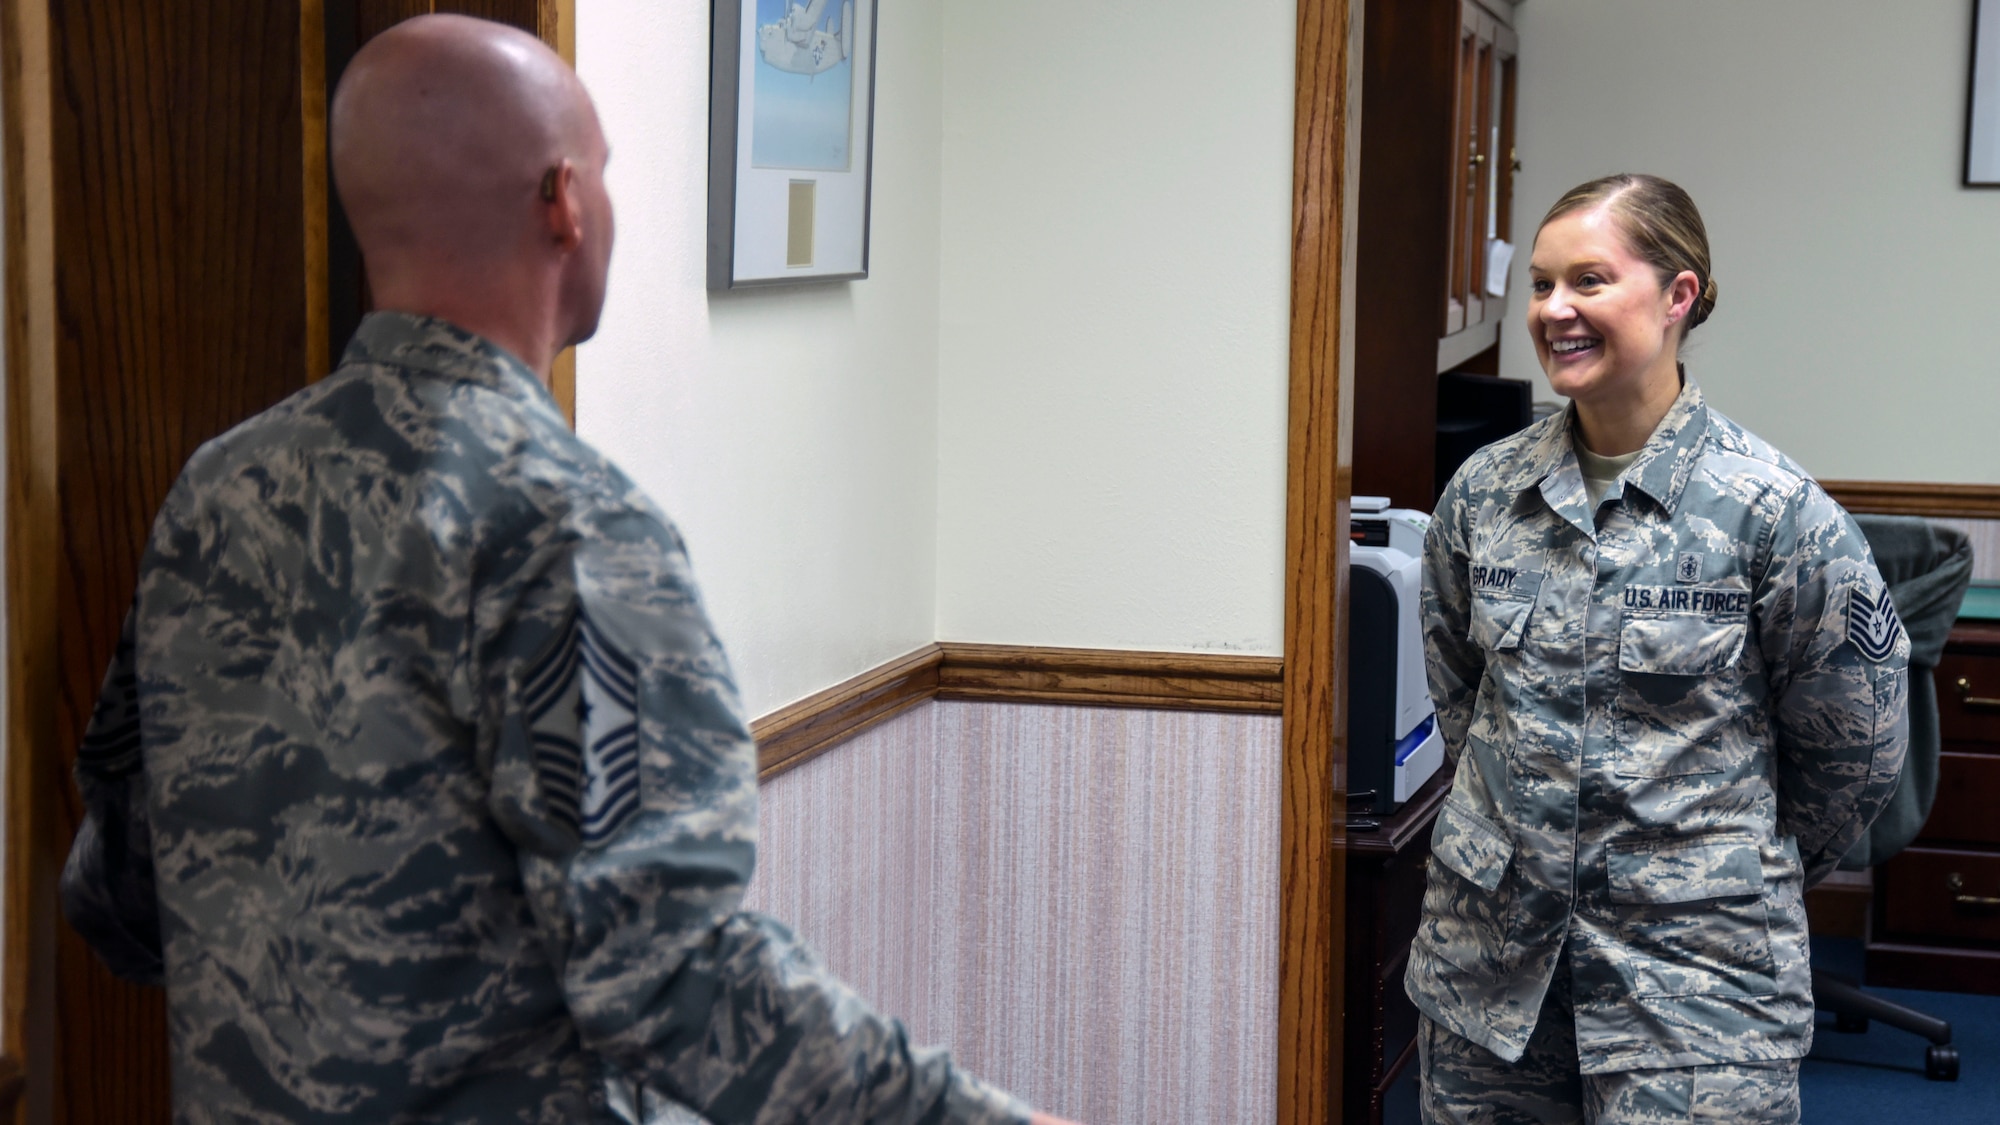 Chief Master Sergeant Thomas F. Good, Twentieth Air Force Command Chief, speaks with Tech. Sgt. Kate Grady, 377th Air Base Wing junior executive officer, at Kirtland Air Force Base, July 18. Grady explained her role in the wing front office, as well as her previous job as a bioenvironmental technician. (U.S. Air Force Photo/Senior Airman Chandler Baker) 